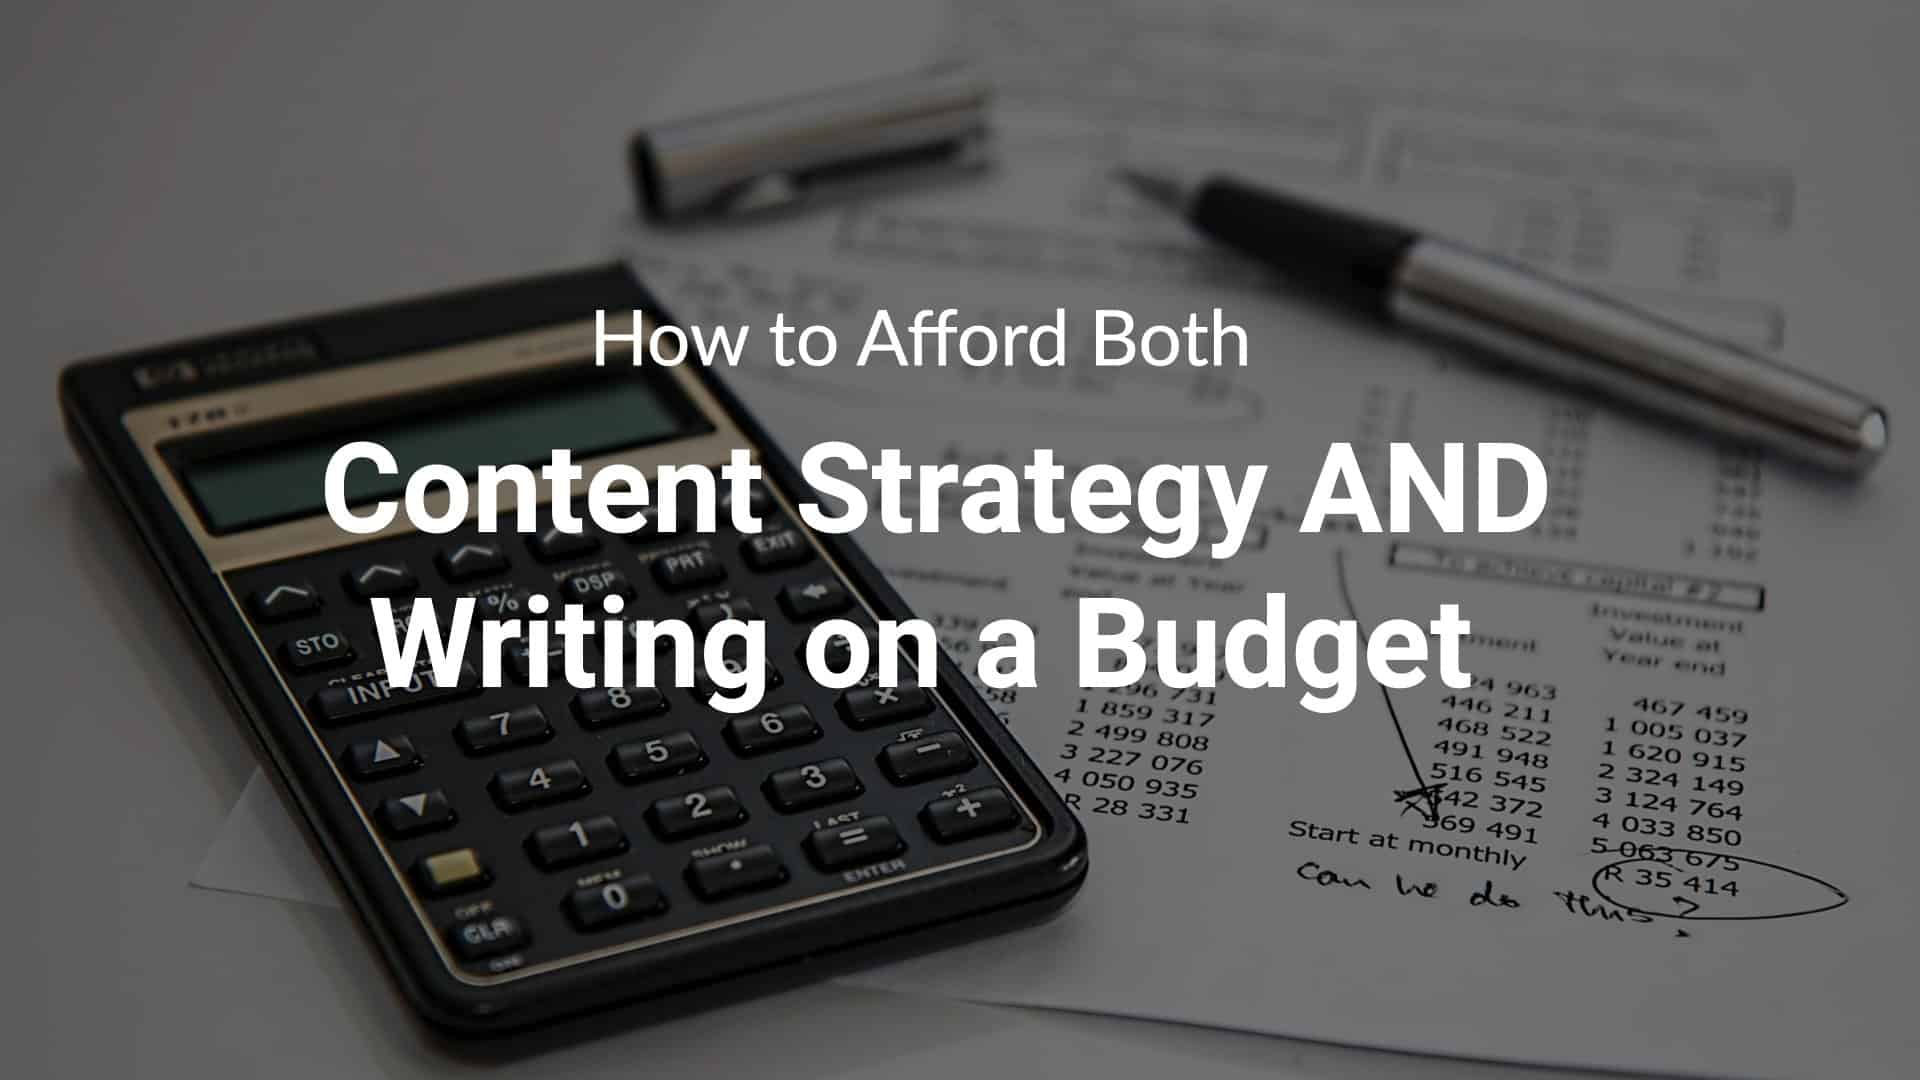 Strategy and Writing on a Budget